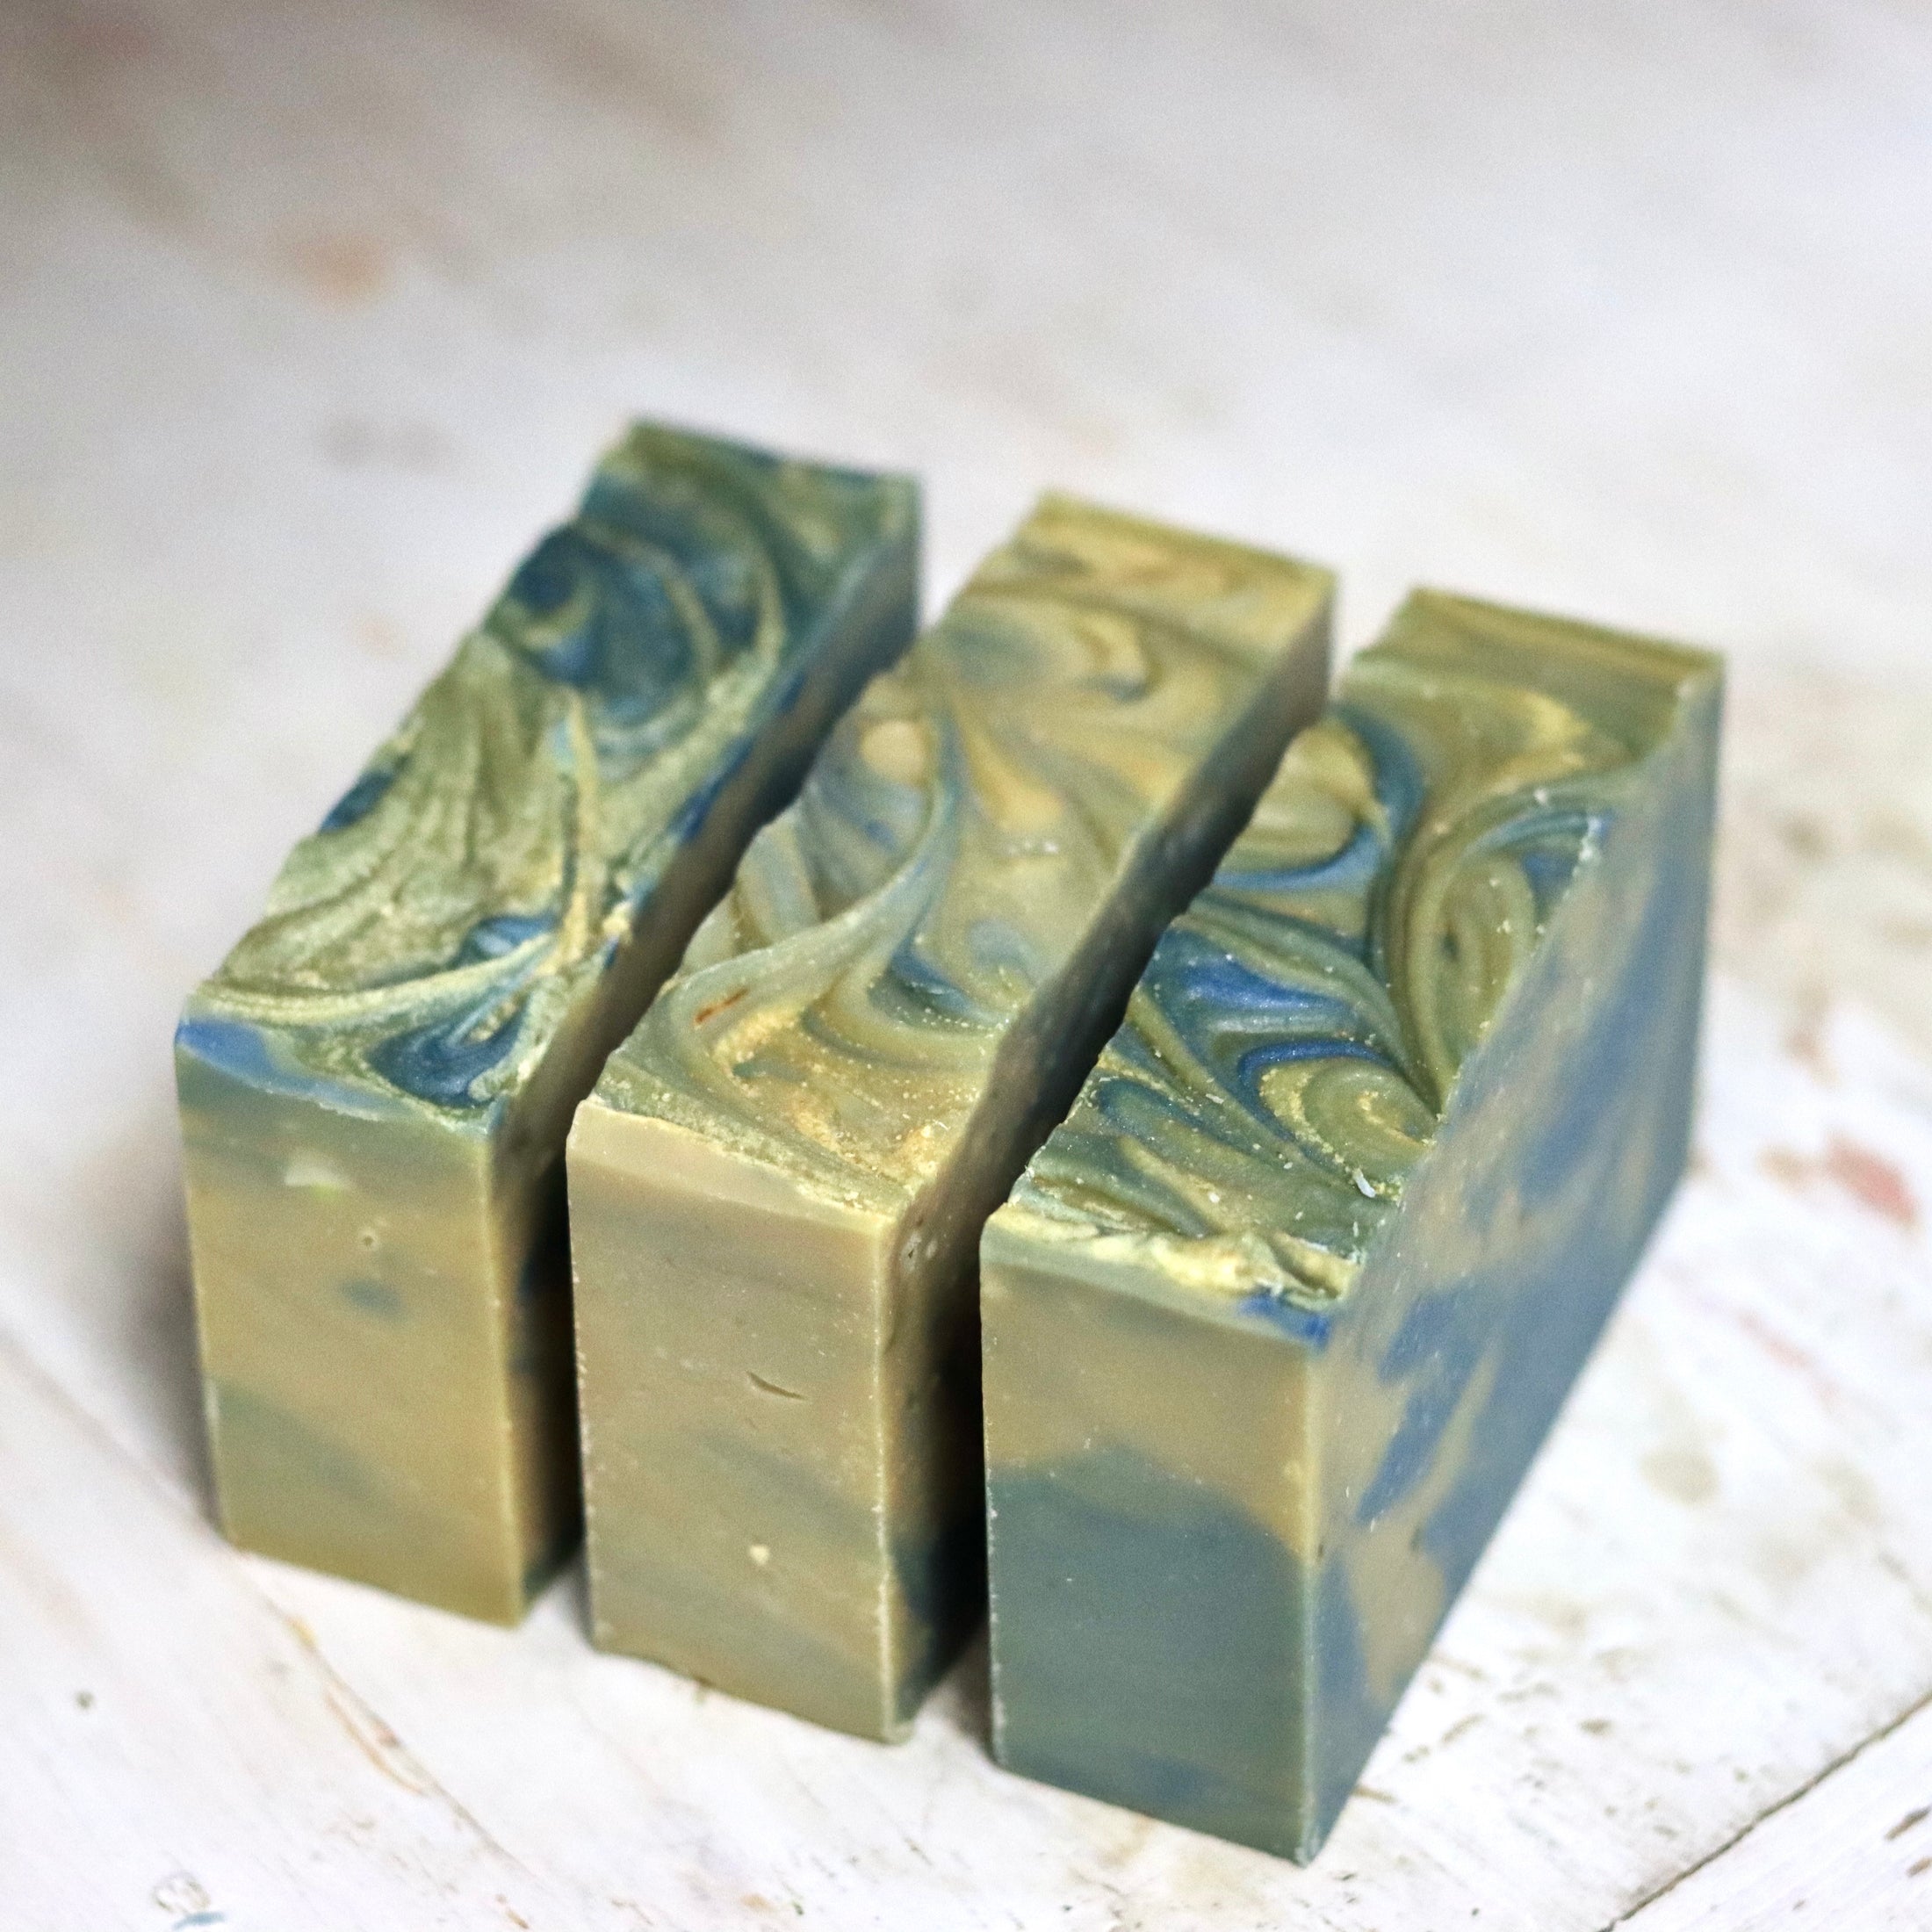 All Natural Cold Process Handmade Bar Soap - Blueberry & Thyme